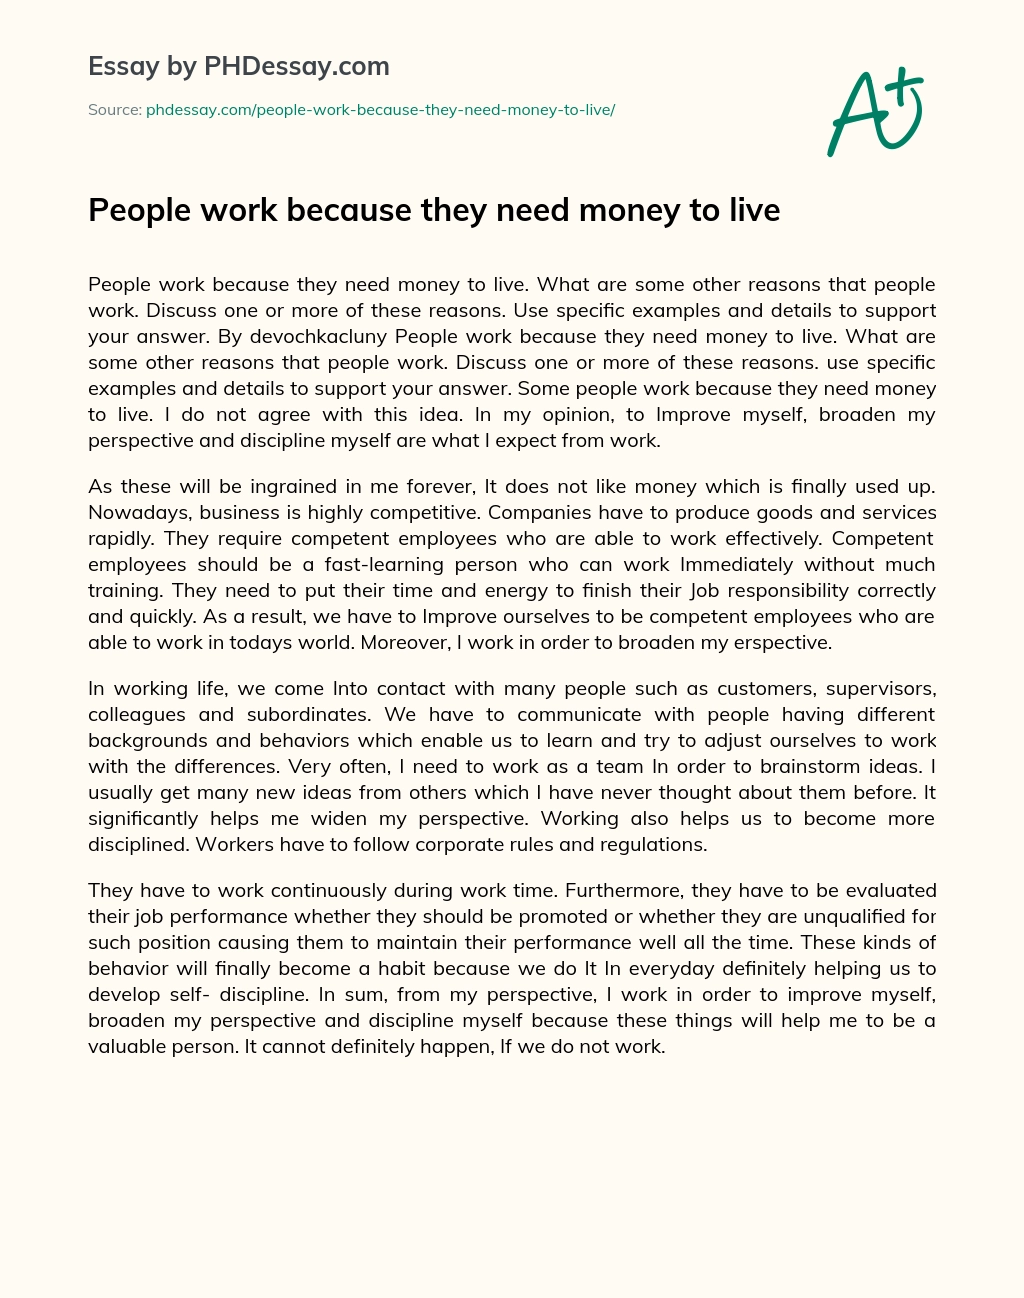 People work because they need money to live essay